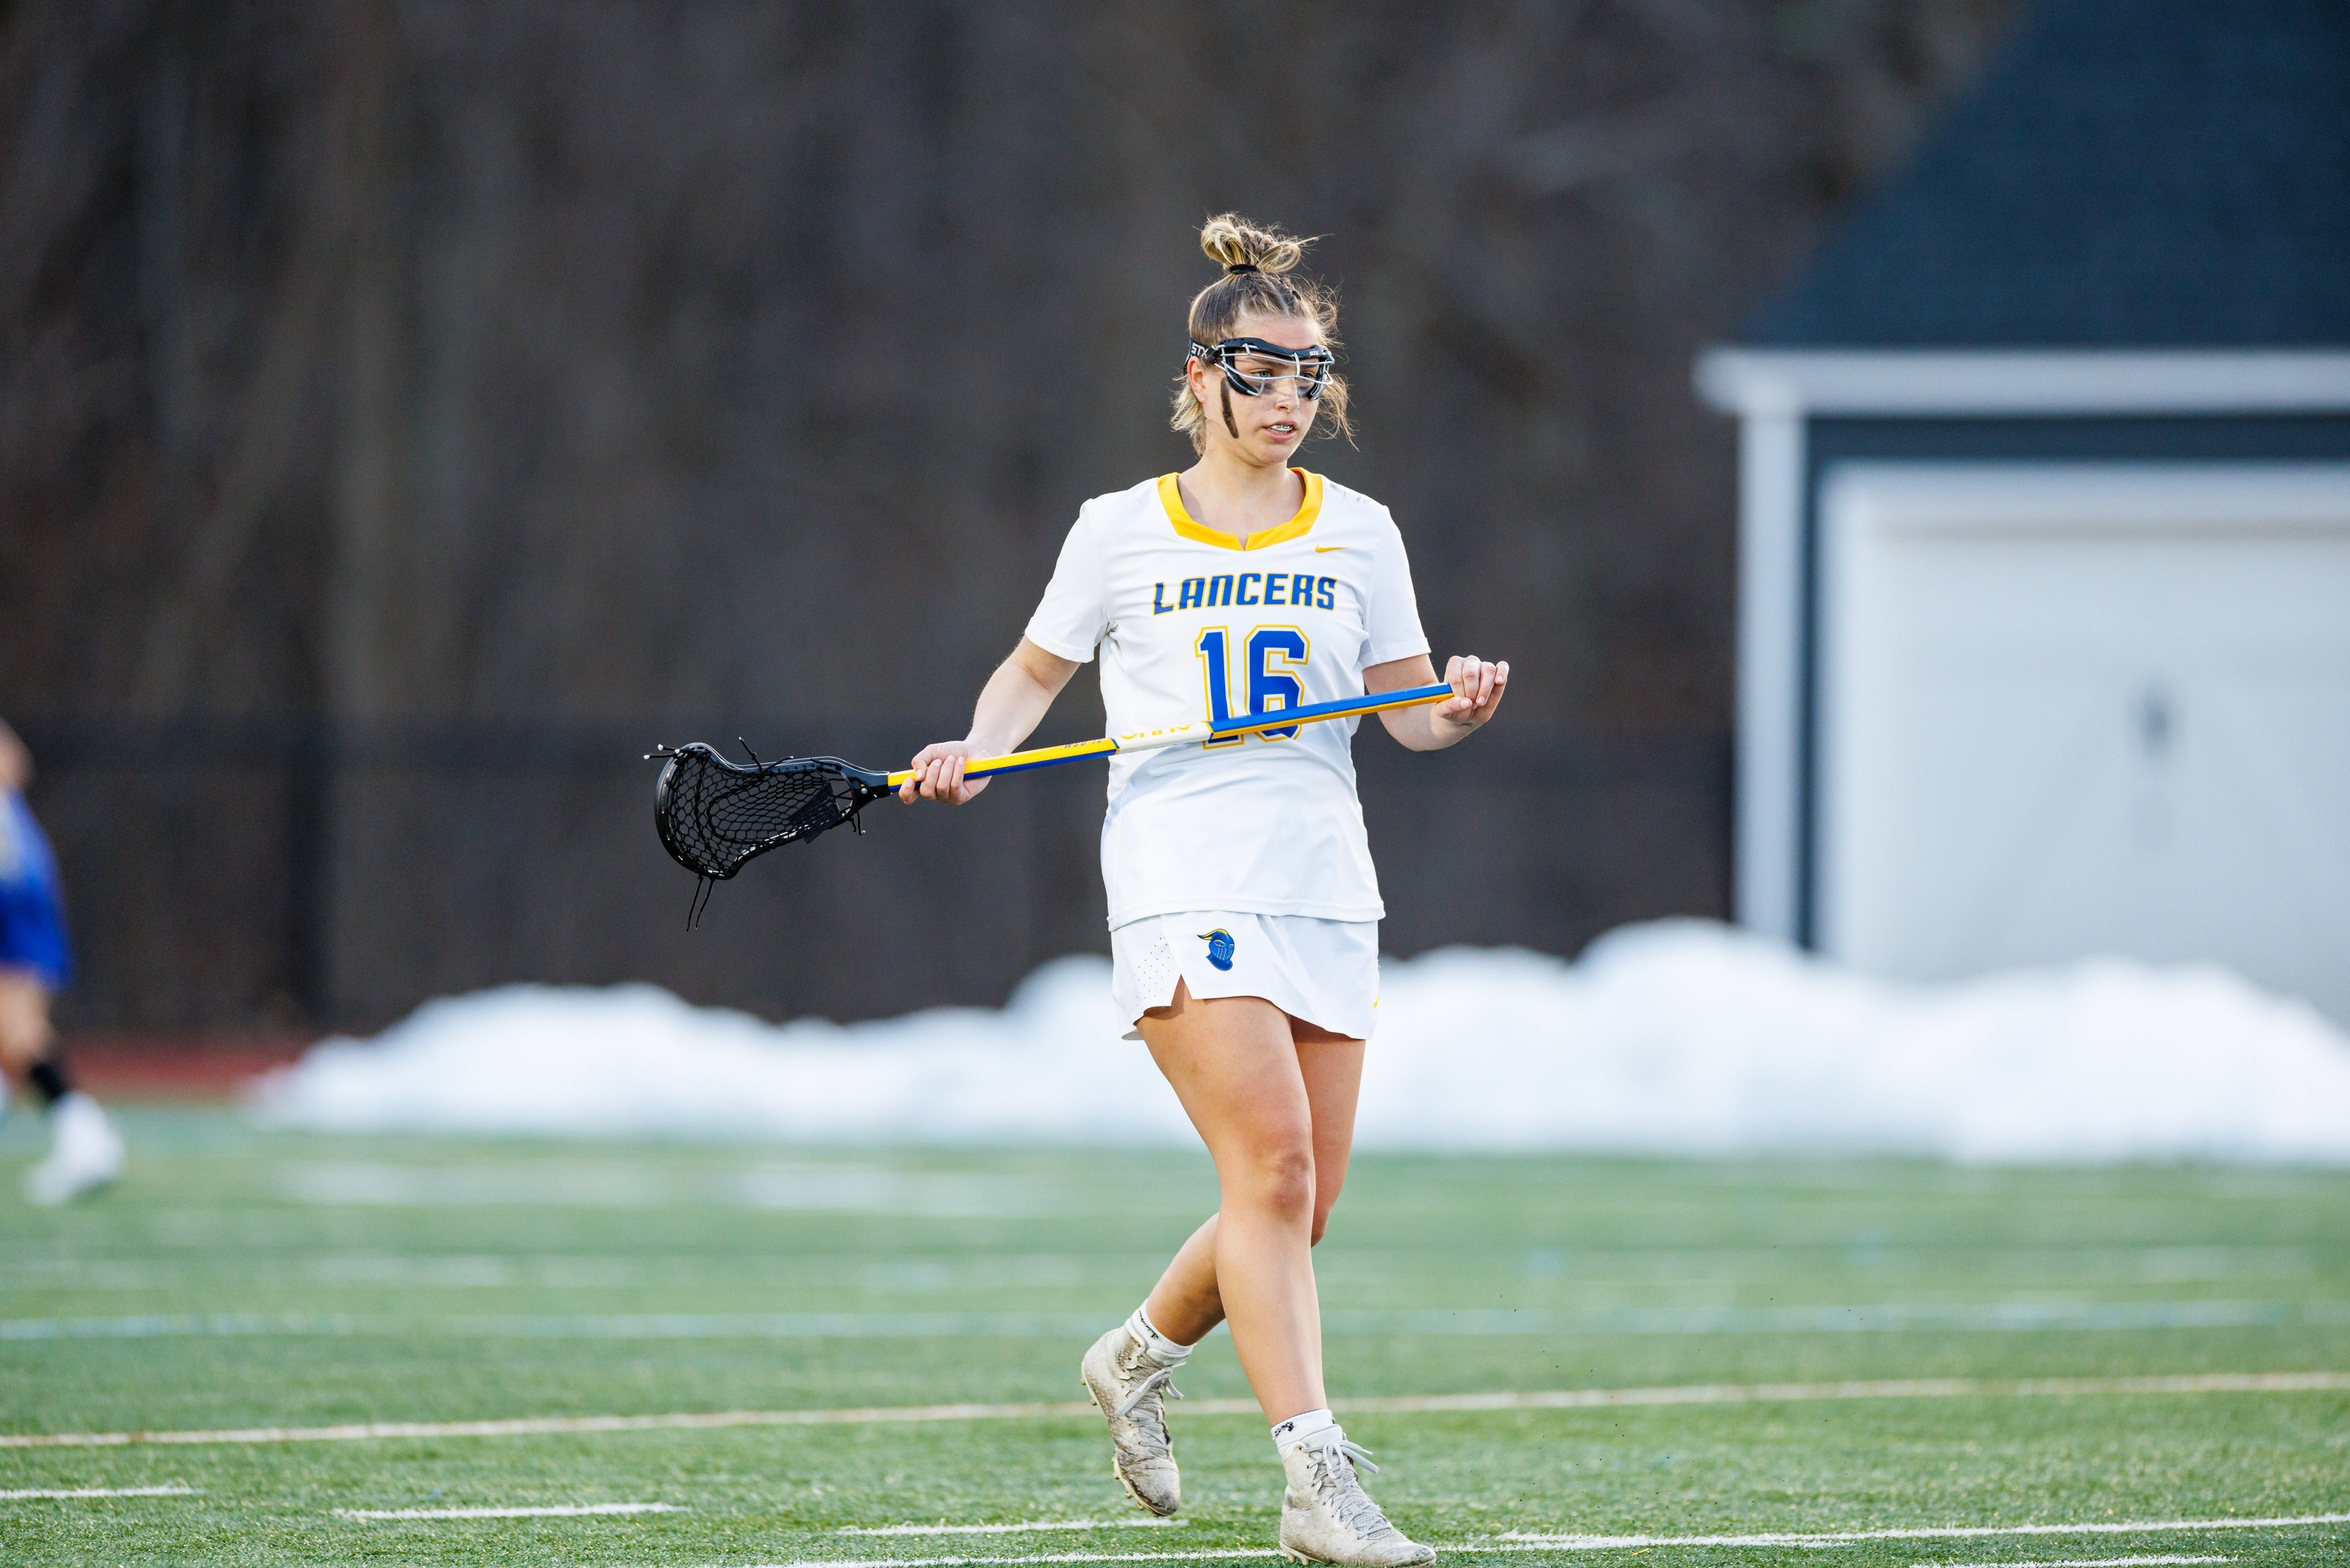 Lancers Remain Undefeated in MASCAC Action with Fourth Straight Victory